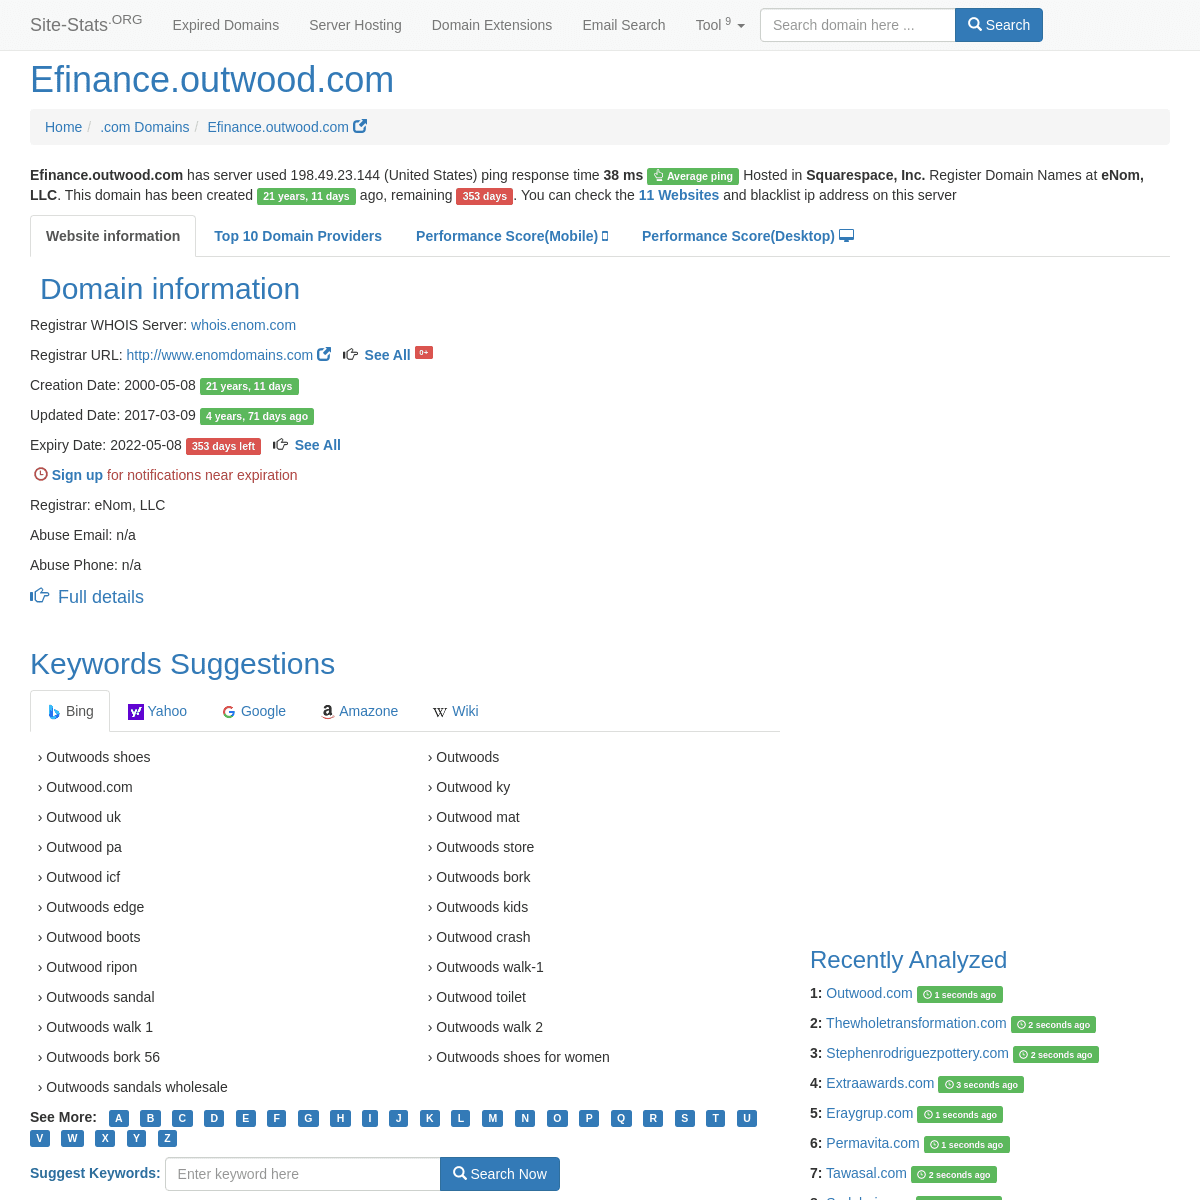 A complete backup of https://site-stats.org/efinance.outwood.com/